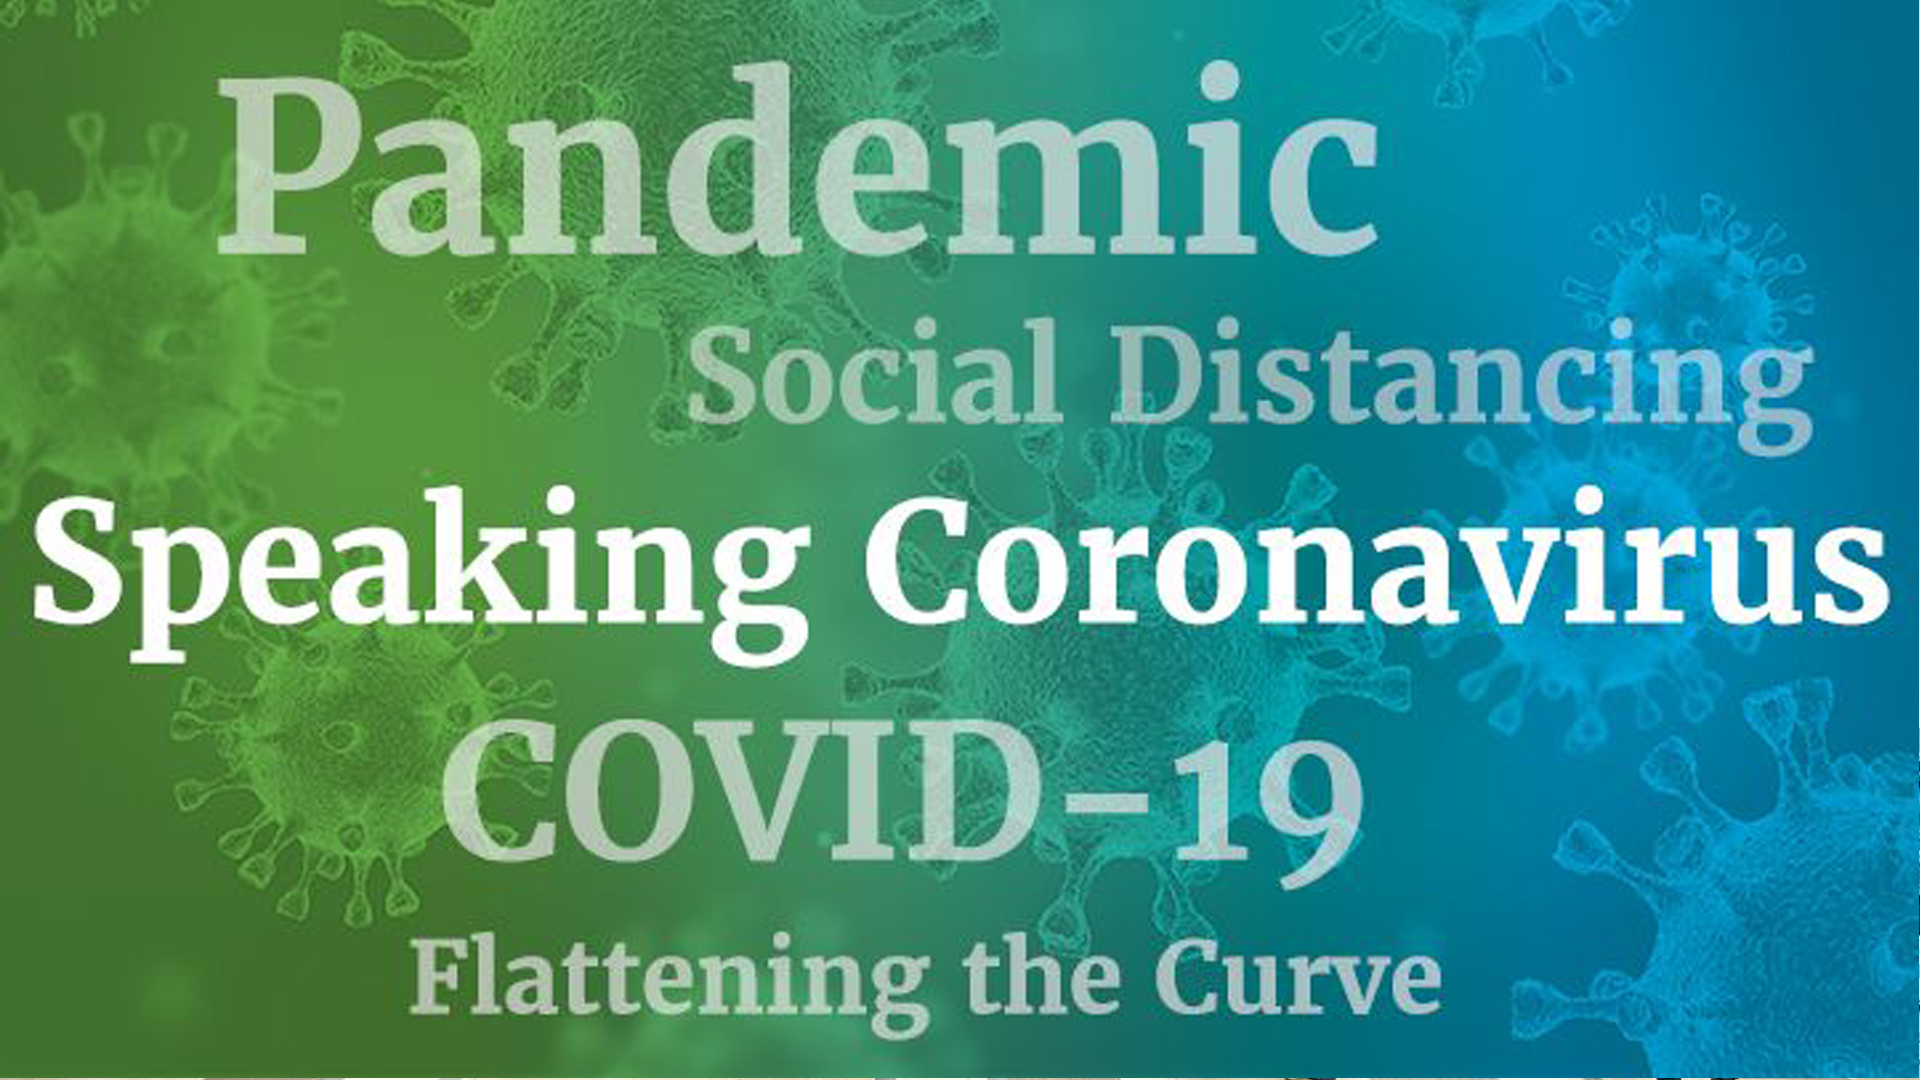 The Covid-19 Pandemic Vocabulary